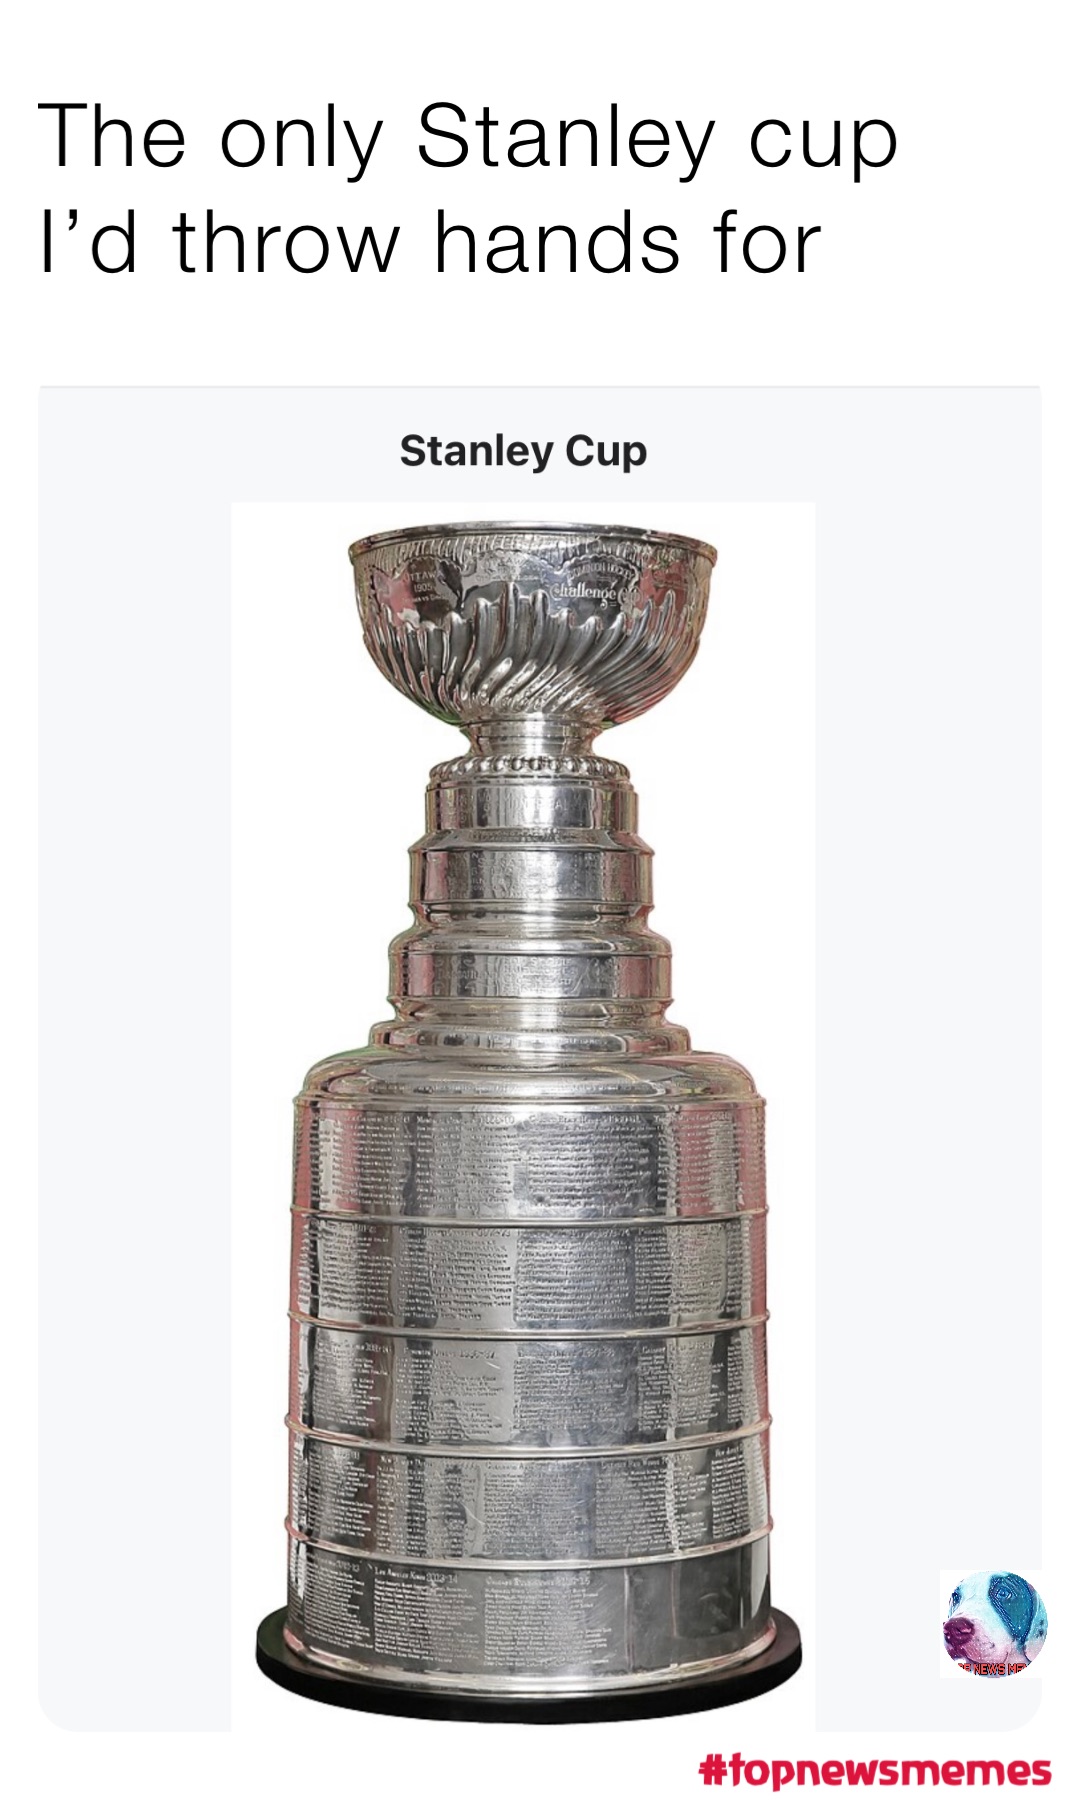 The only Stanley cup I’d throw hands for